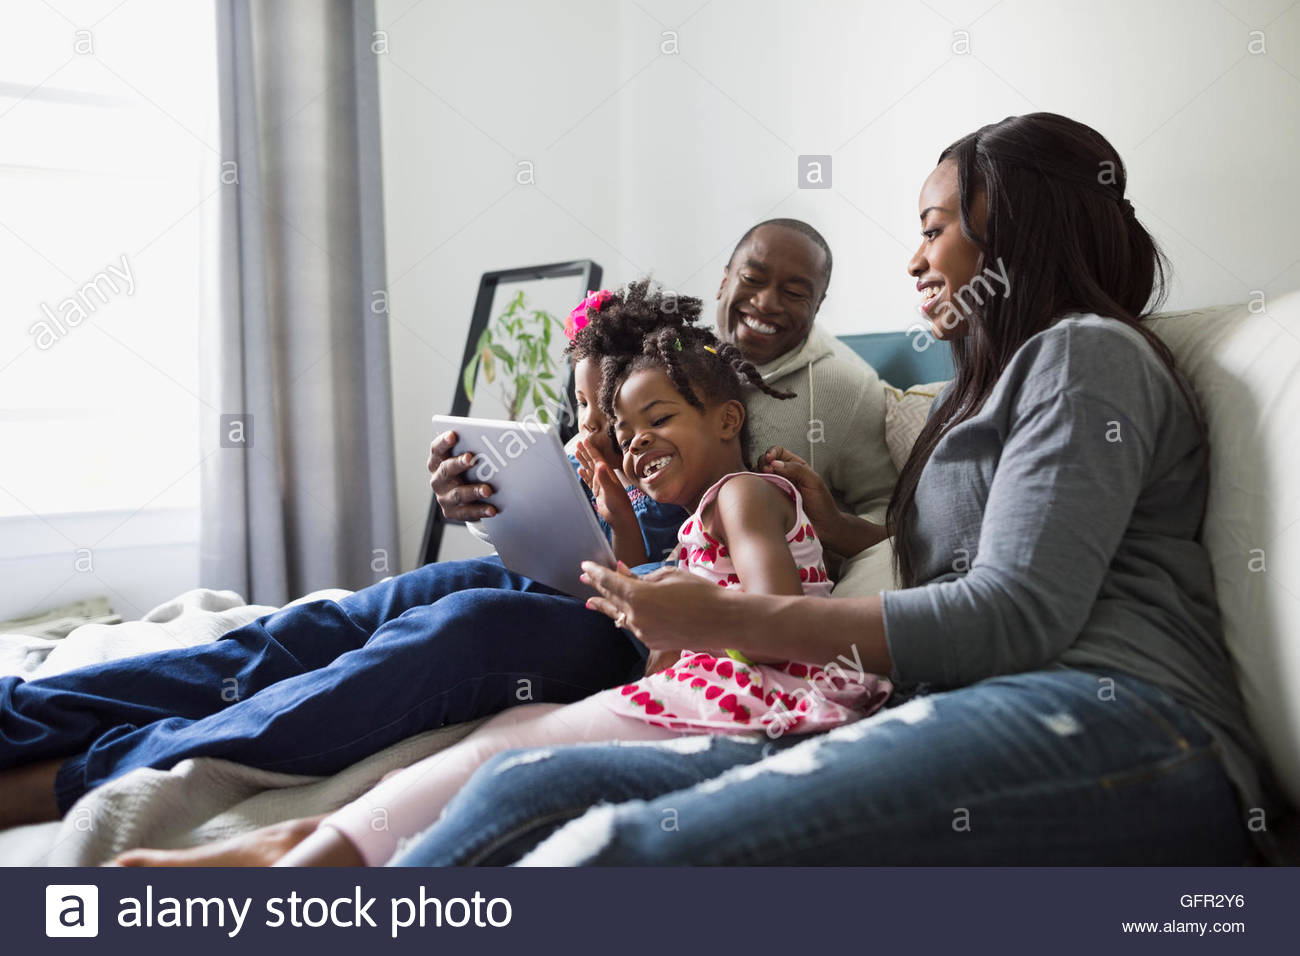 Young family using digital tablet Stock Photo